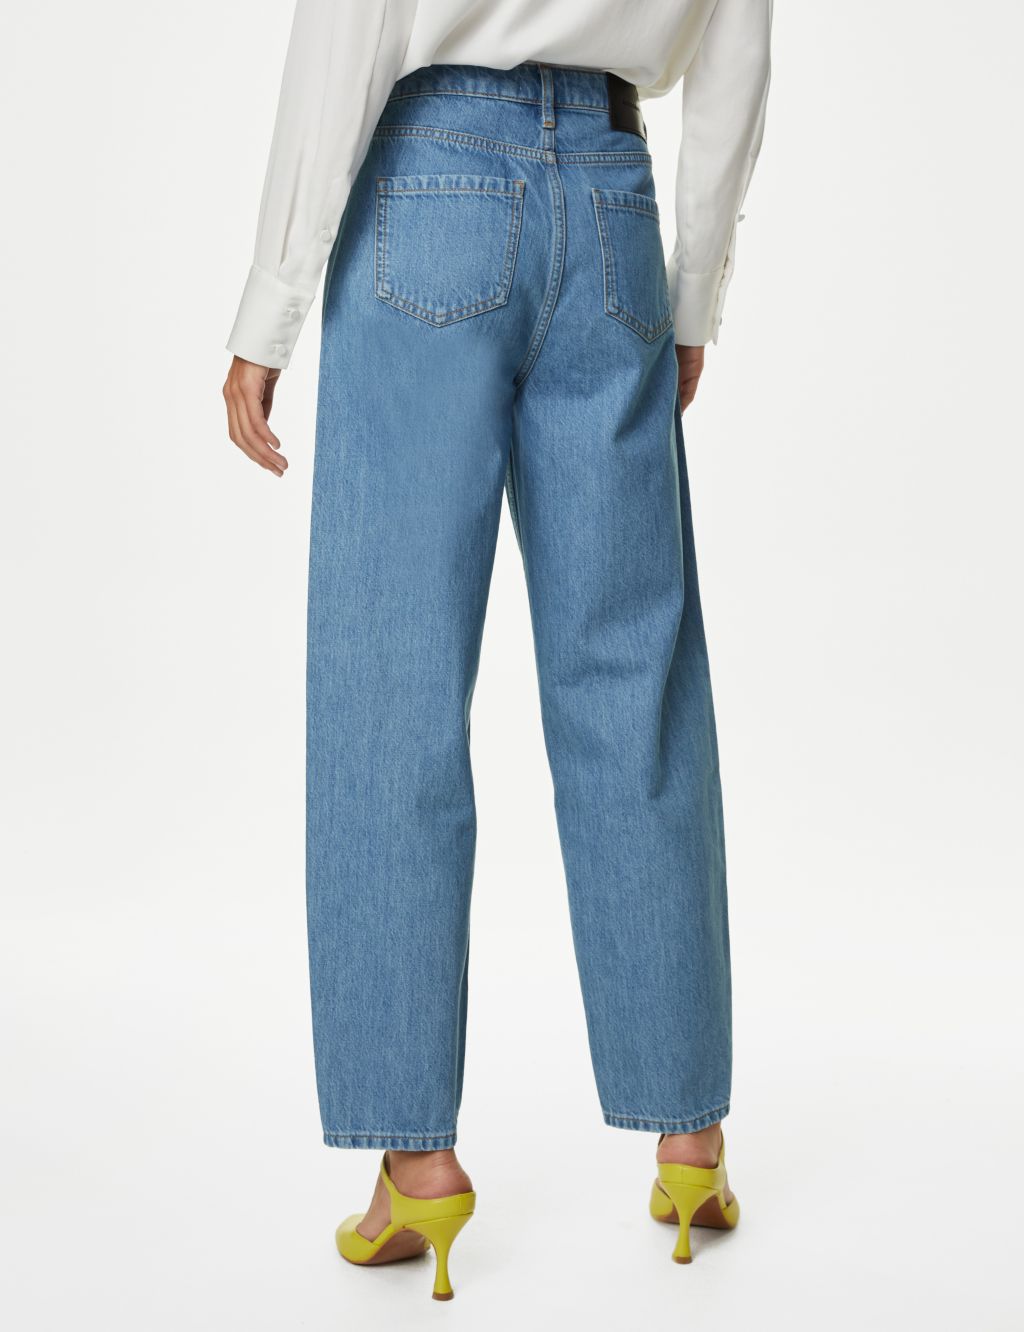 Relaxed High Waisted Straight Leg Jeans image 5